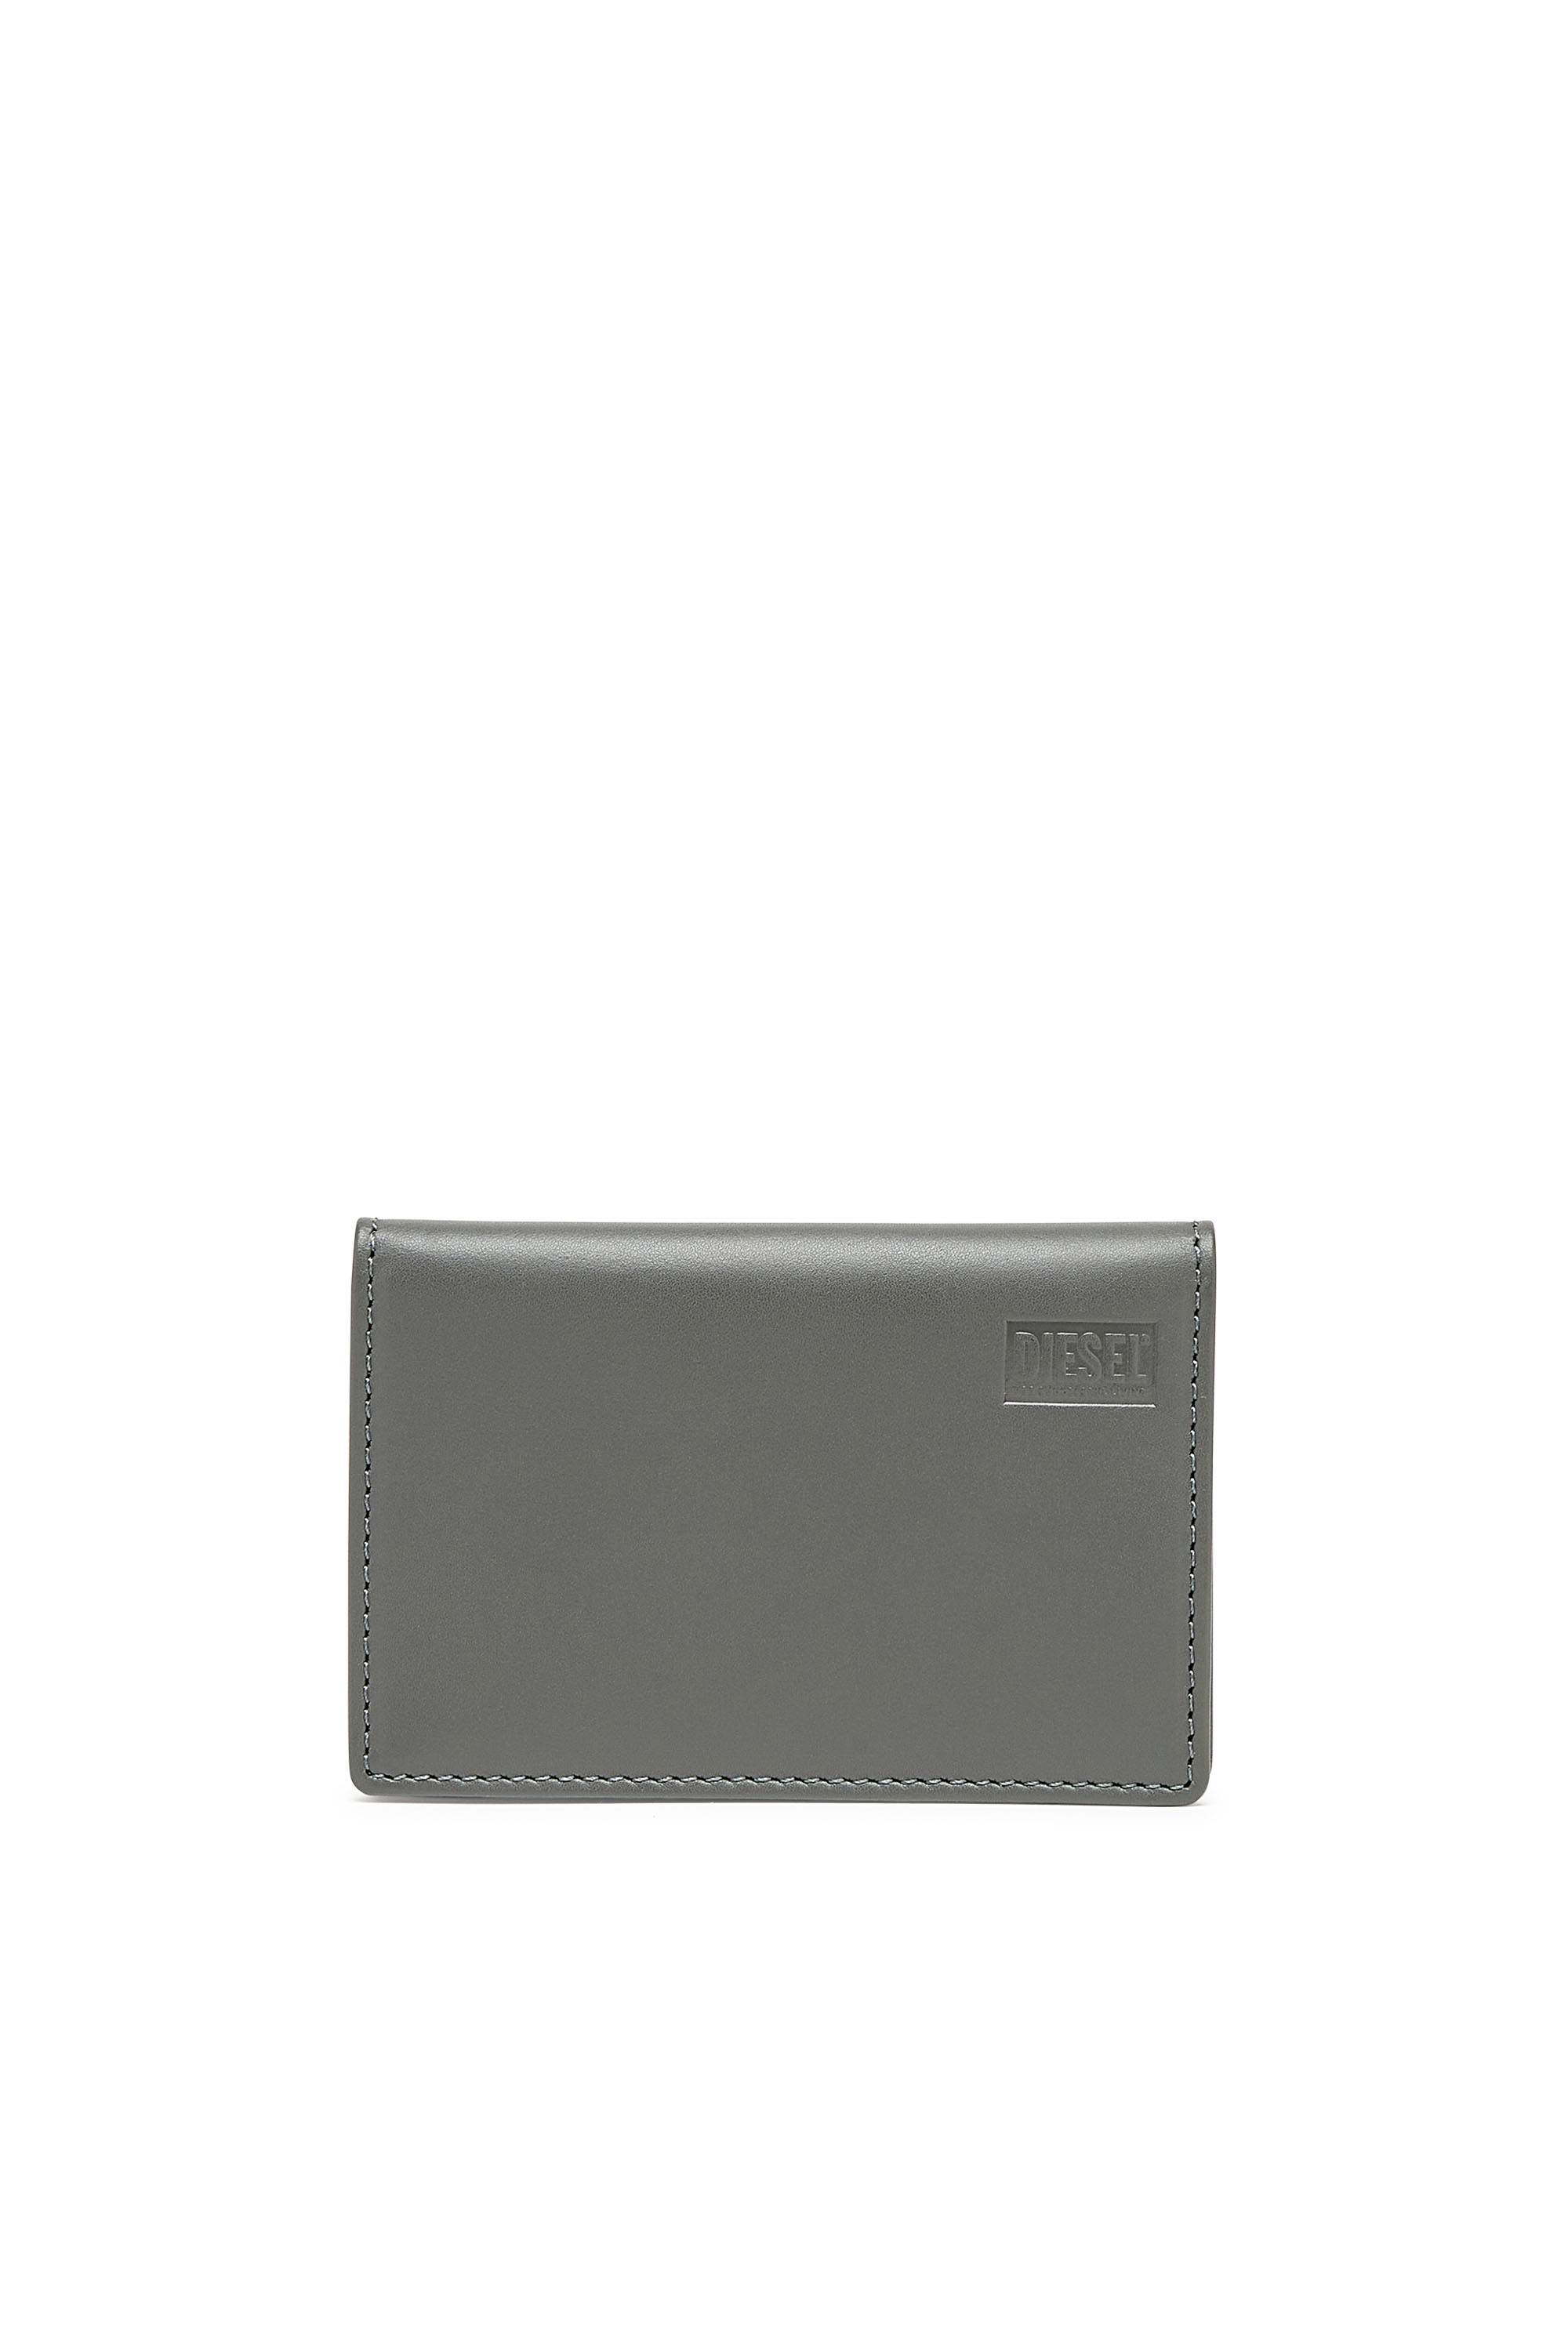 Diesel - Bi-fold card holder in two-tone leather - Small Wallets - Man - Multicolor